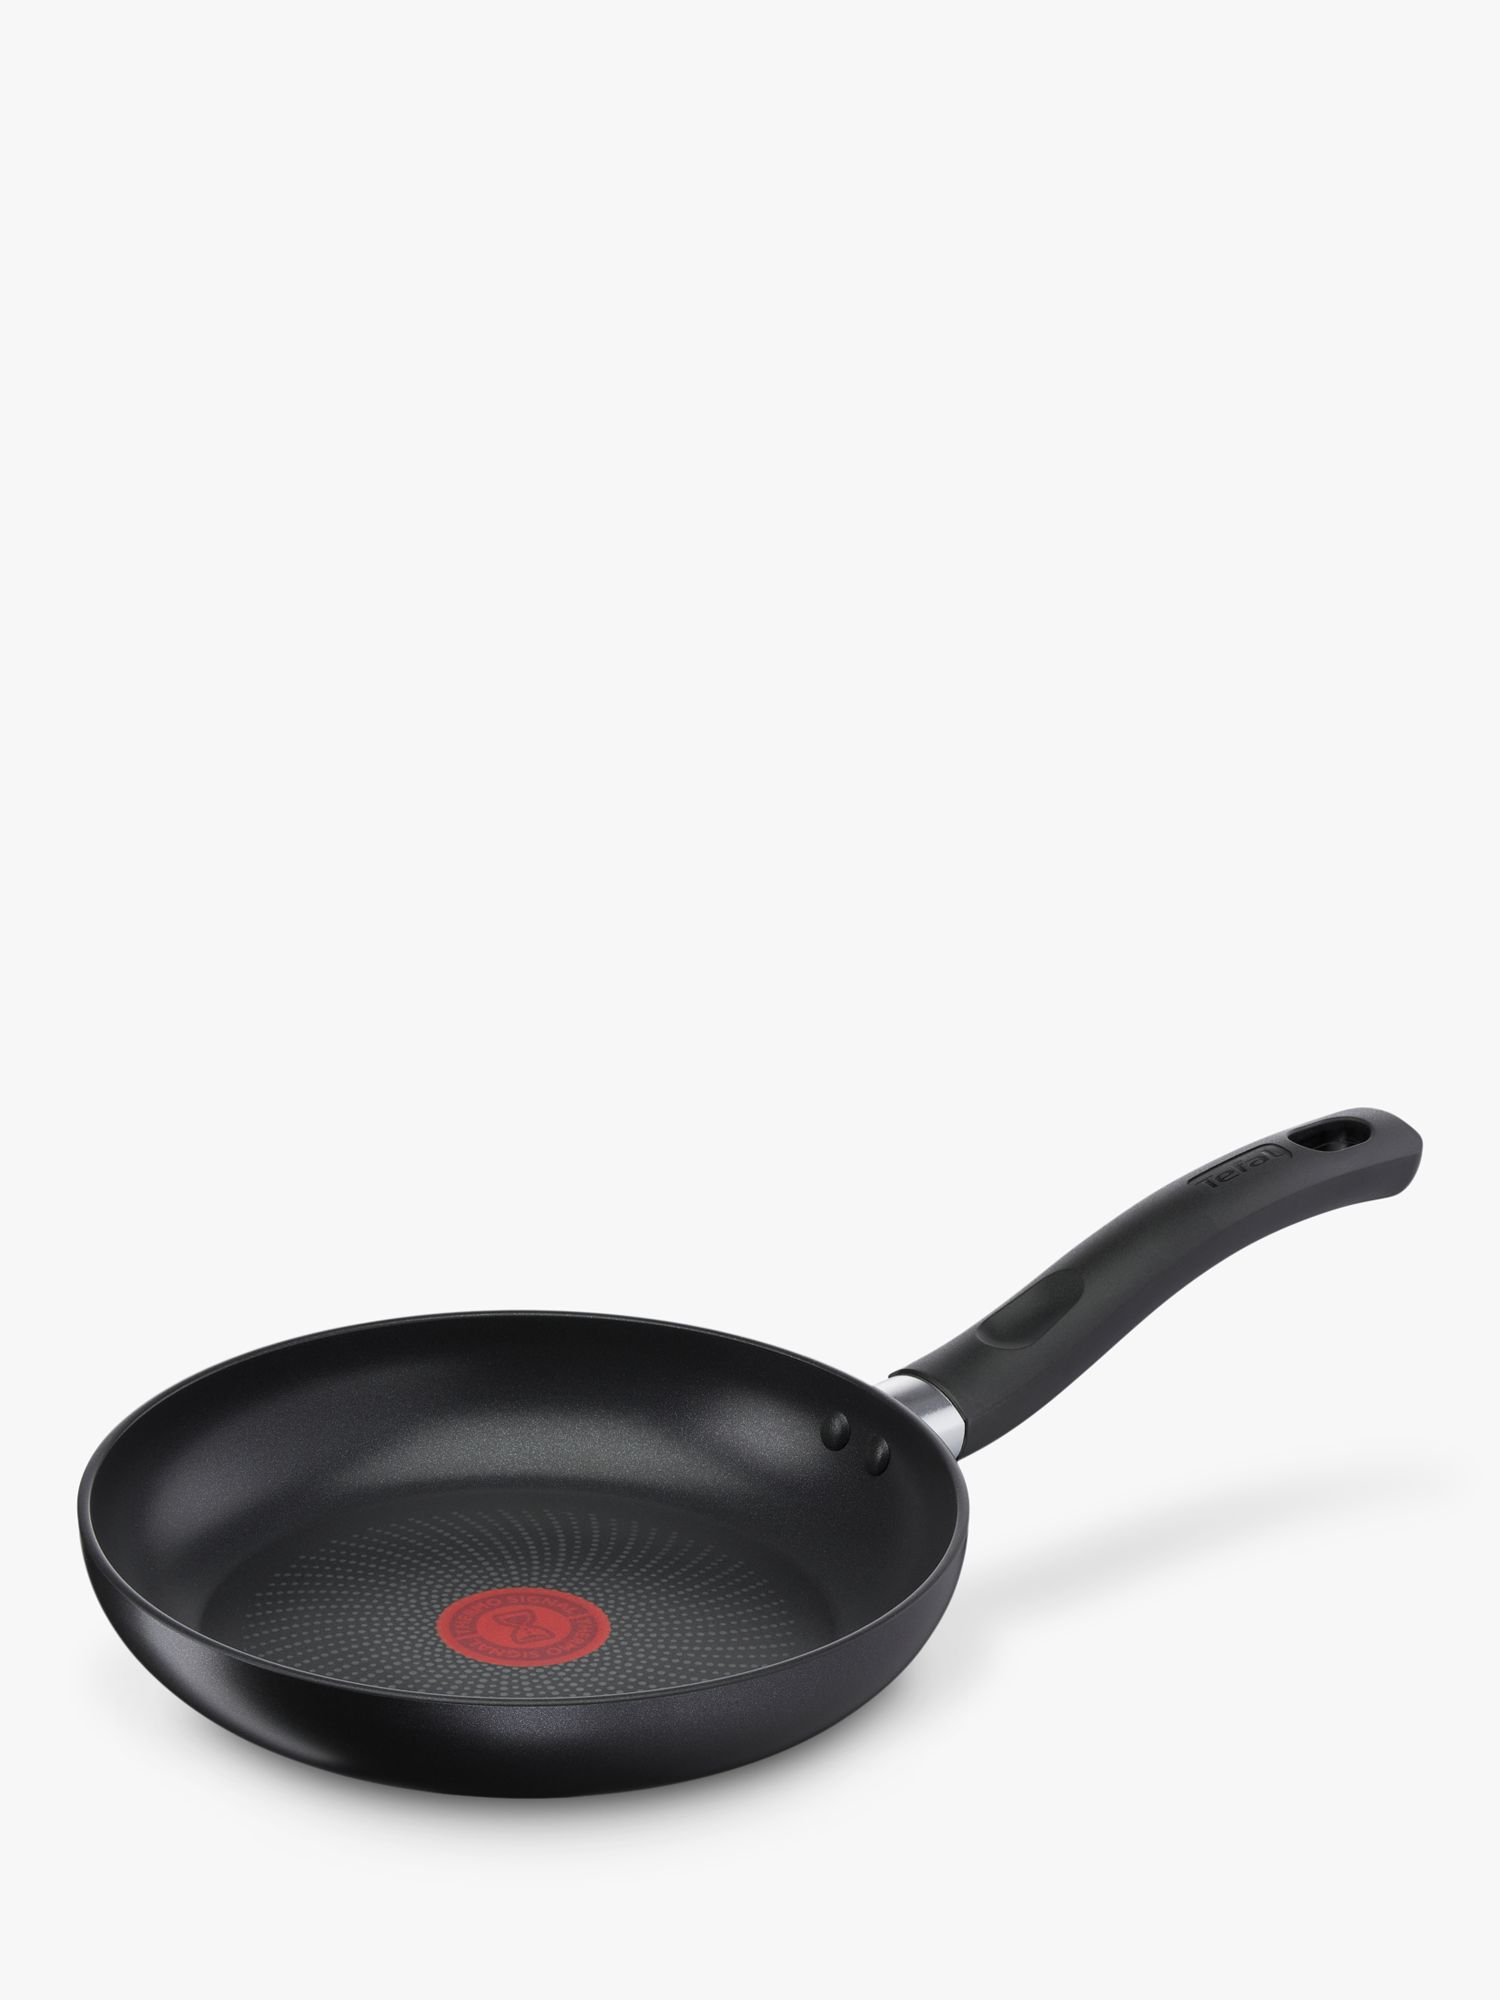 Tefal 24cm Frying Pan, Unlimited ON, Non- Stick Induction, Aluminium,  Exclusive